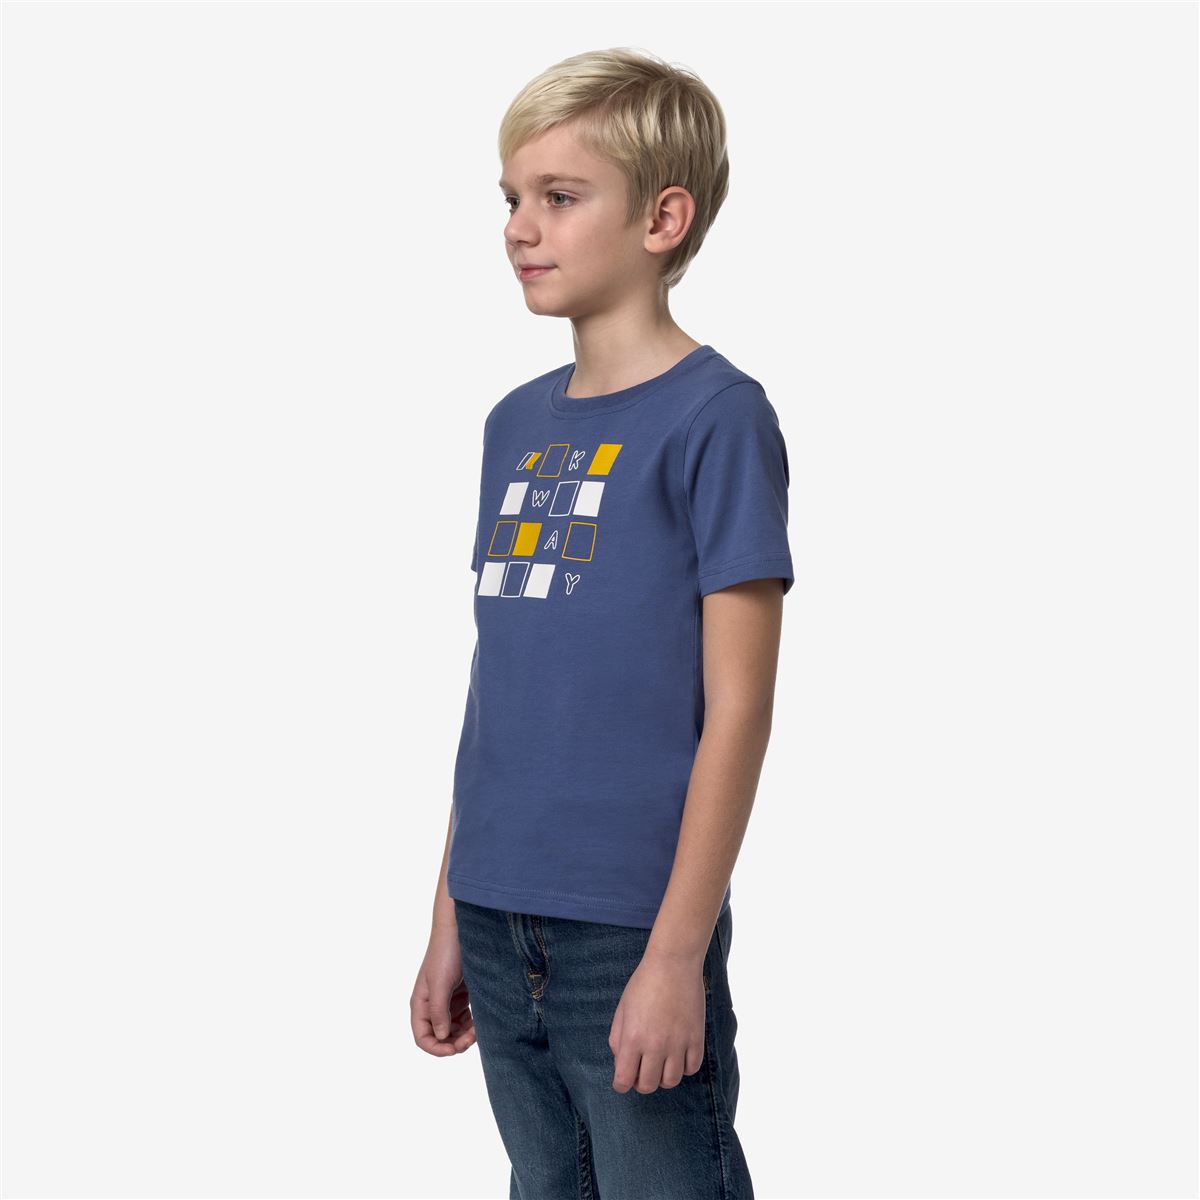 P. ODOM PUZZLE - T-SHIRTS & TOP - KID UNISEX - BLUE FIORD